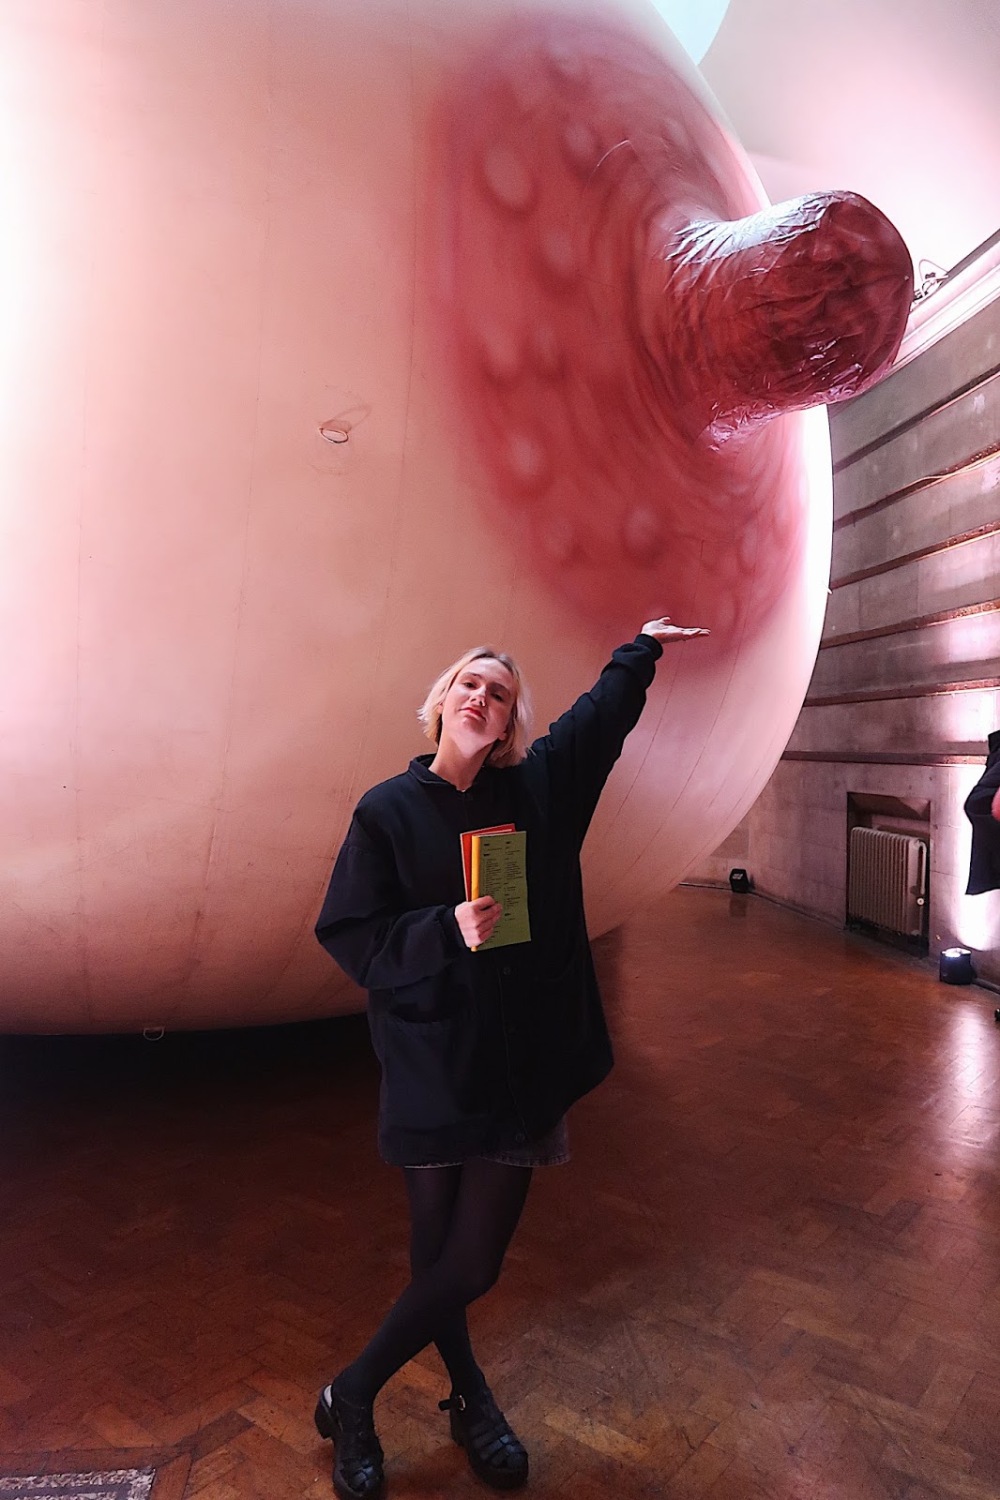 Free the feed inflatable breast, Not for Sale, London 2018